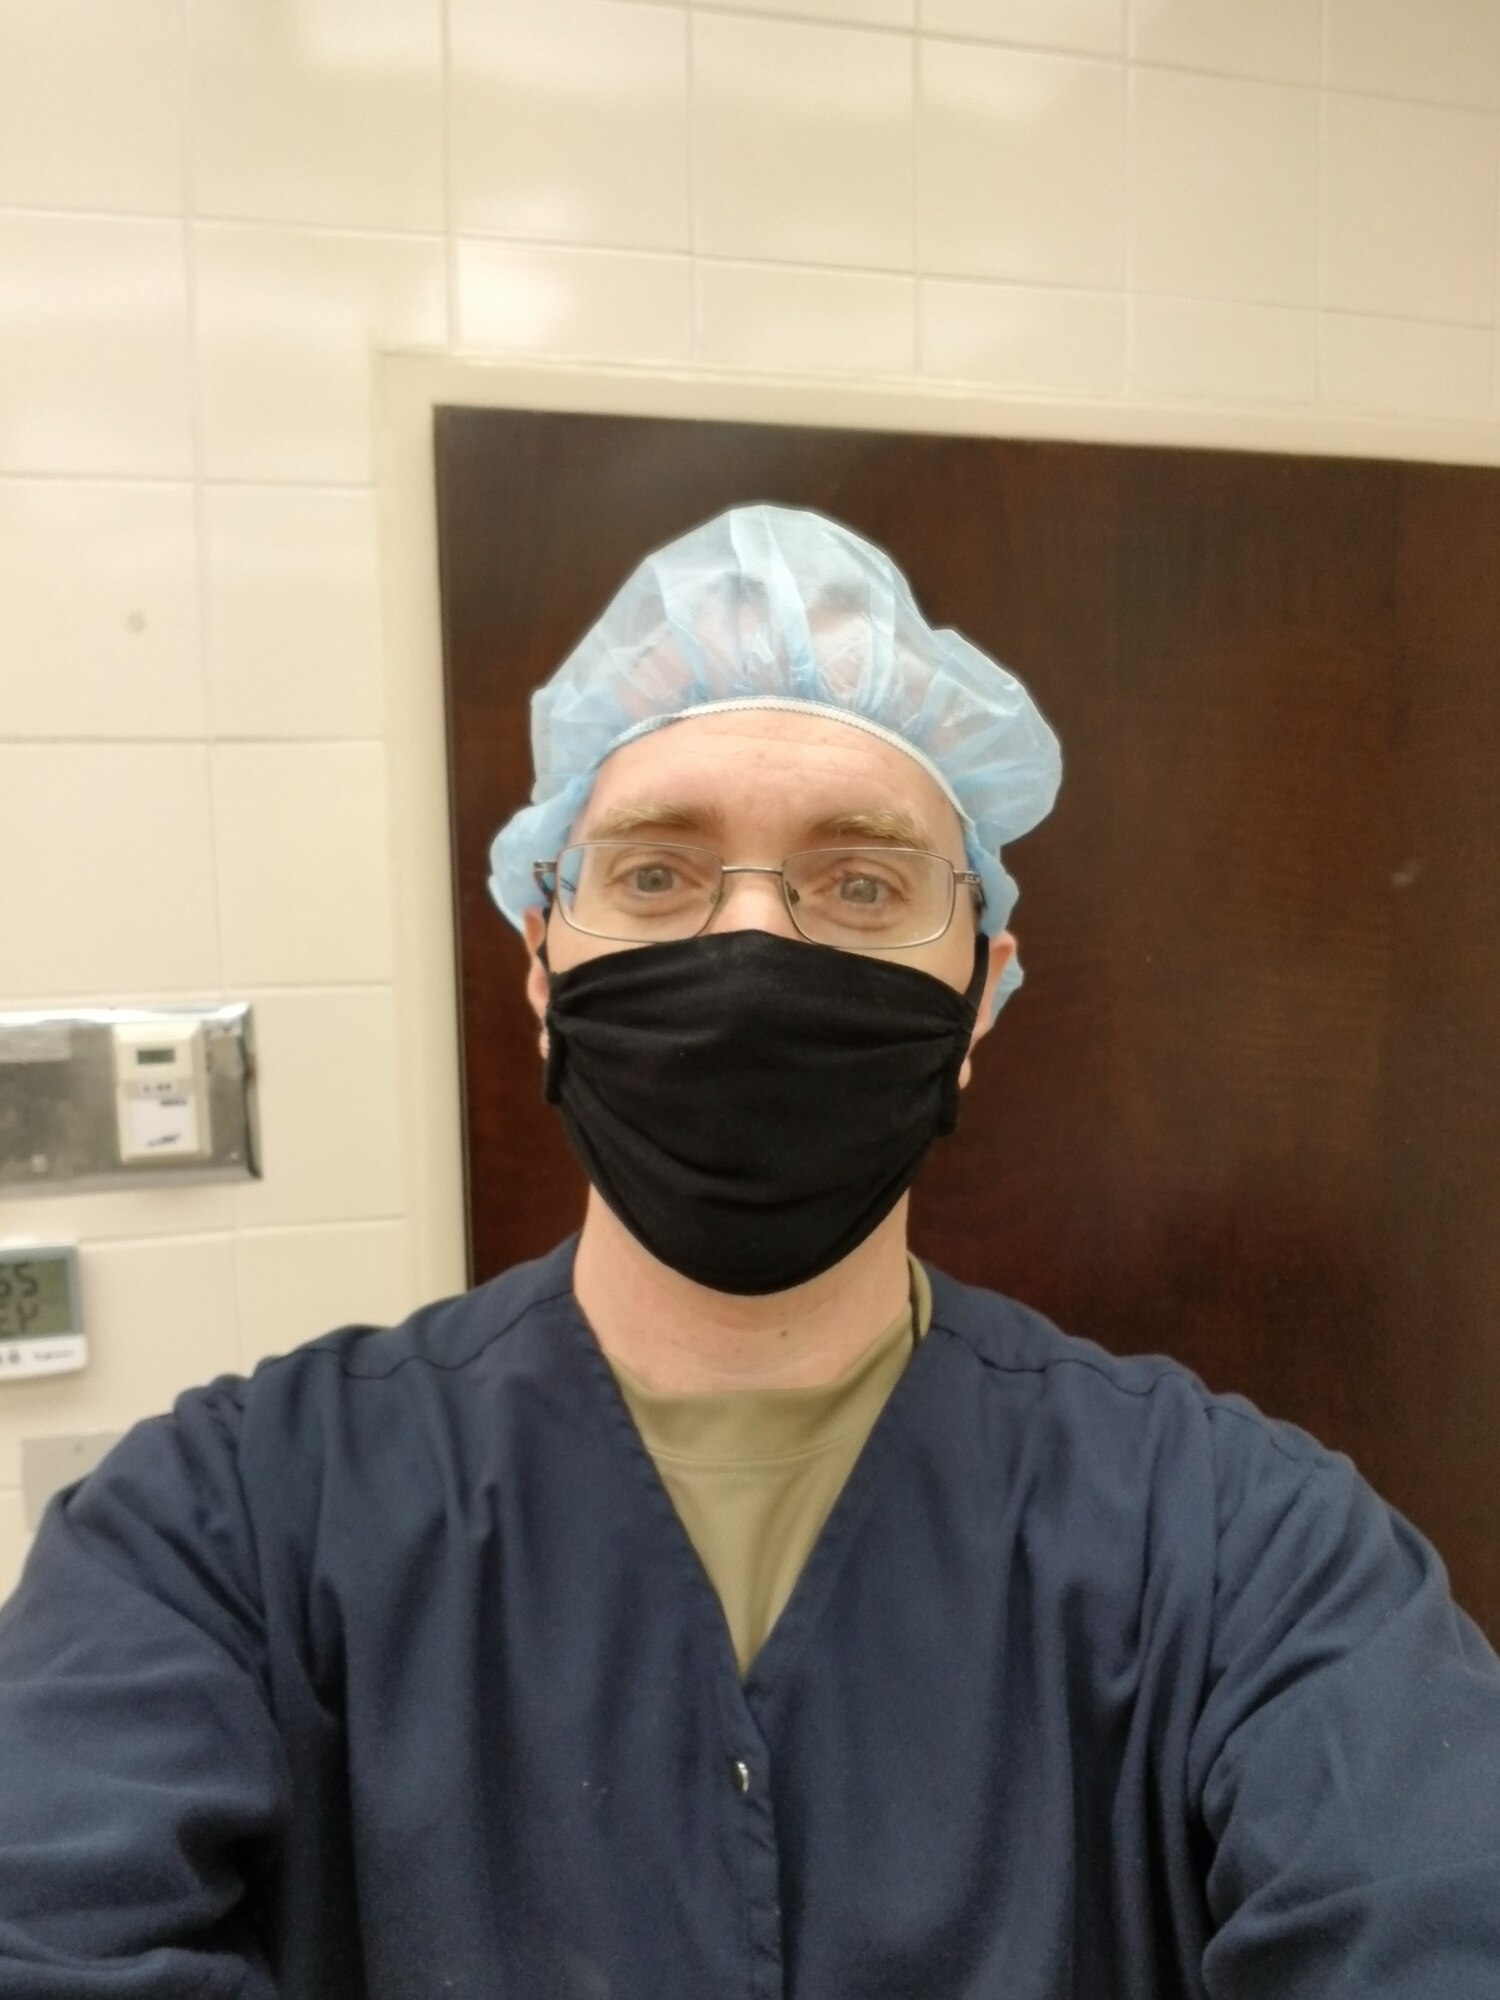 Man in scrubs with mask.